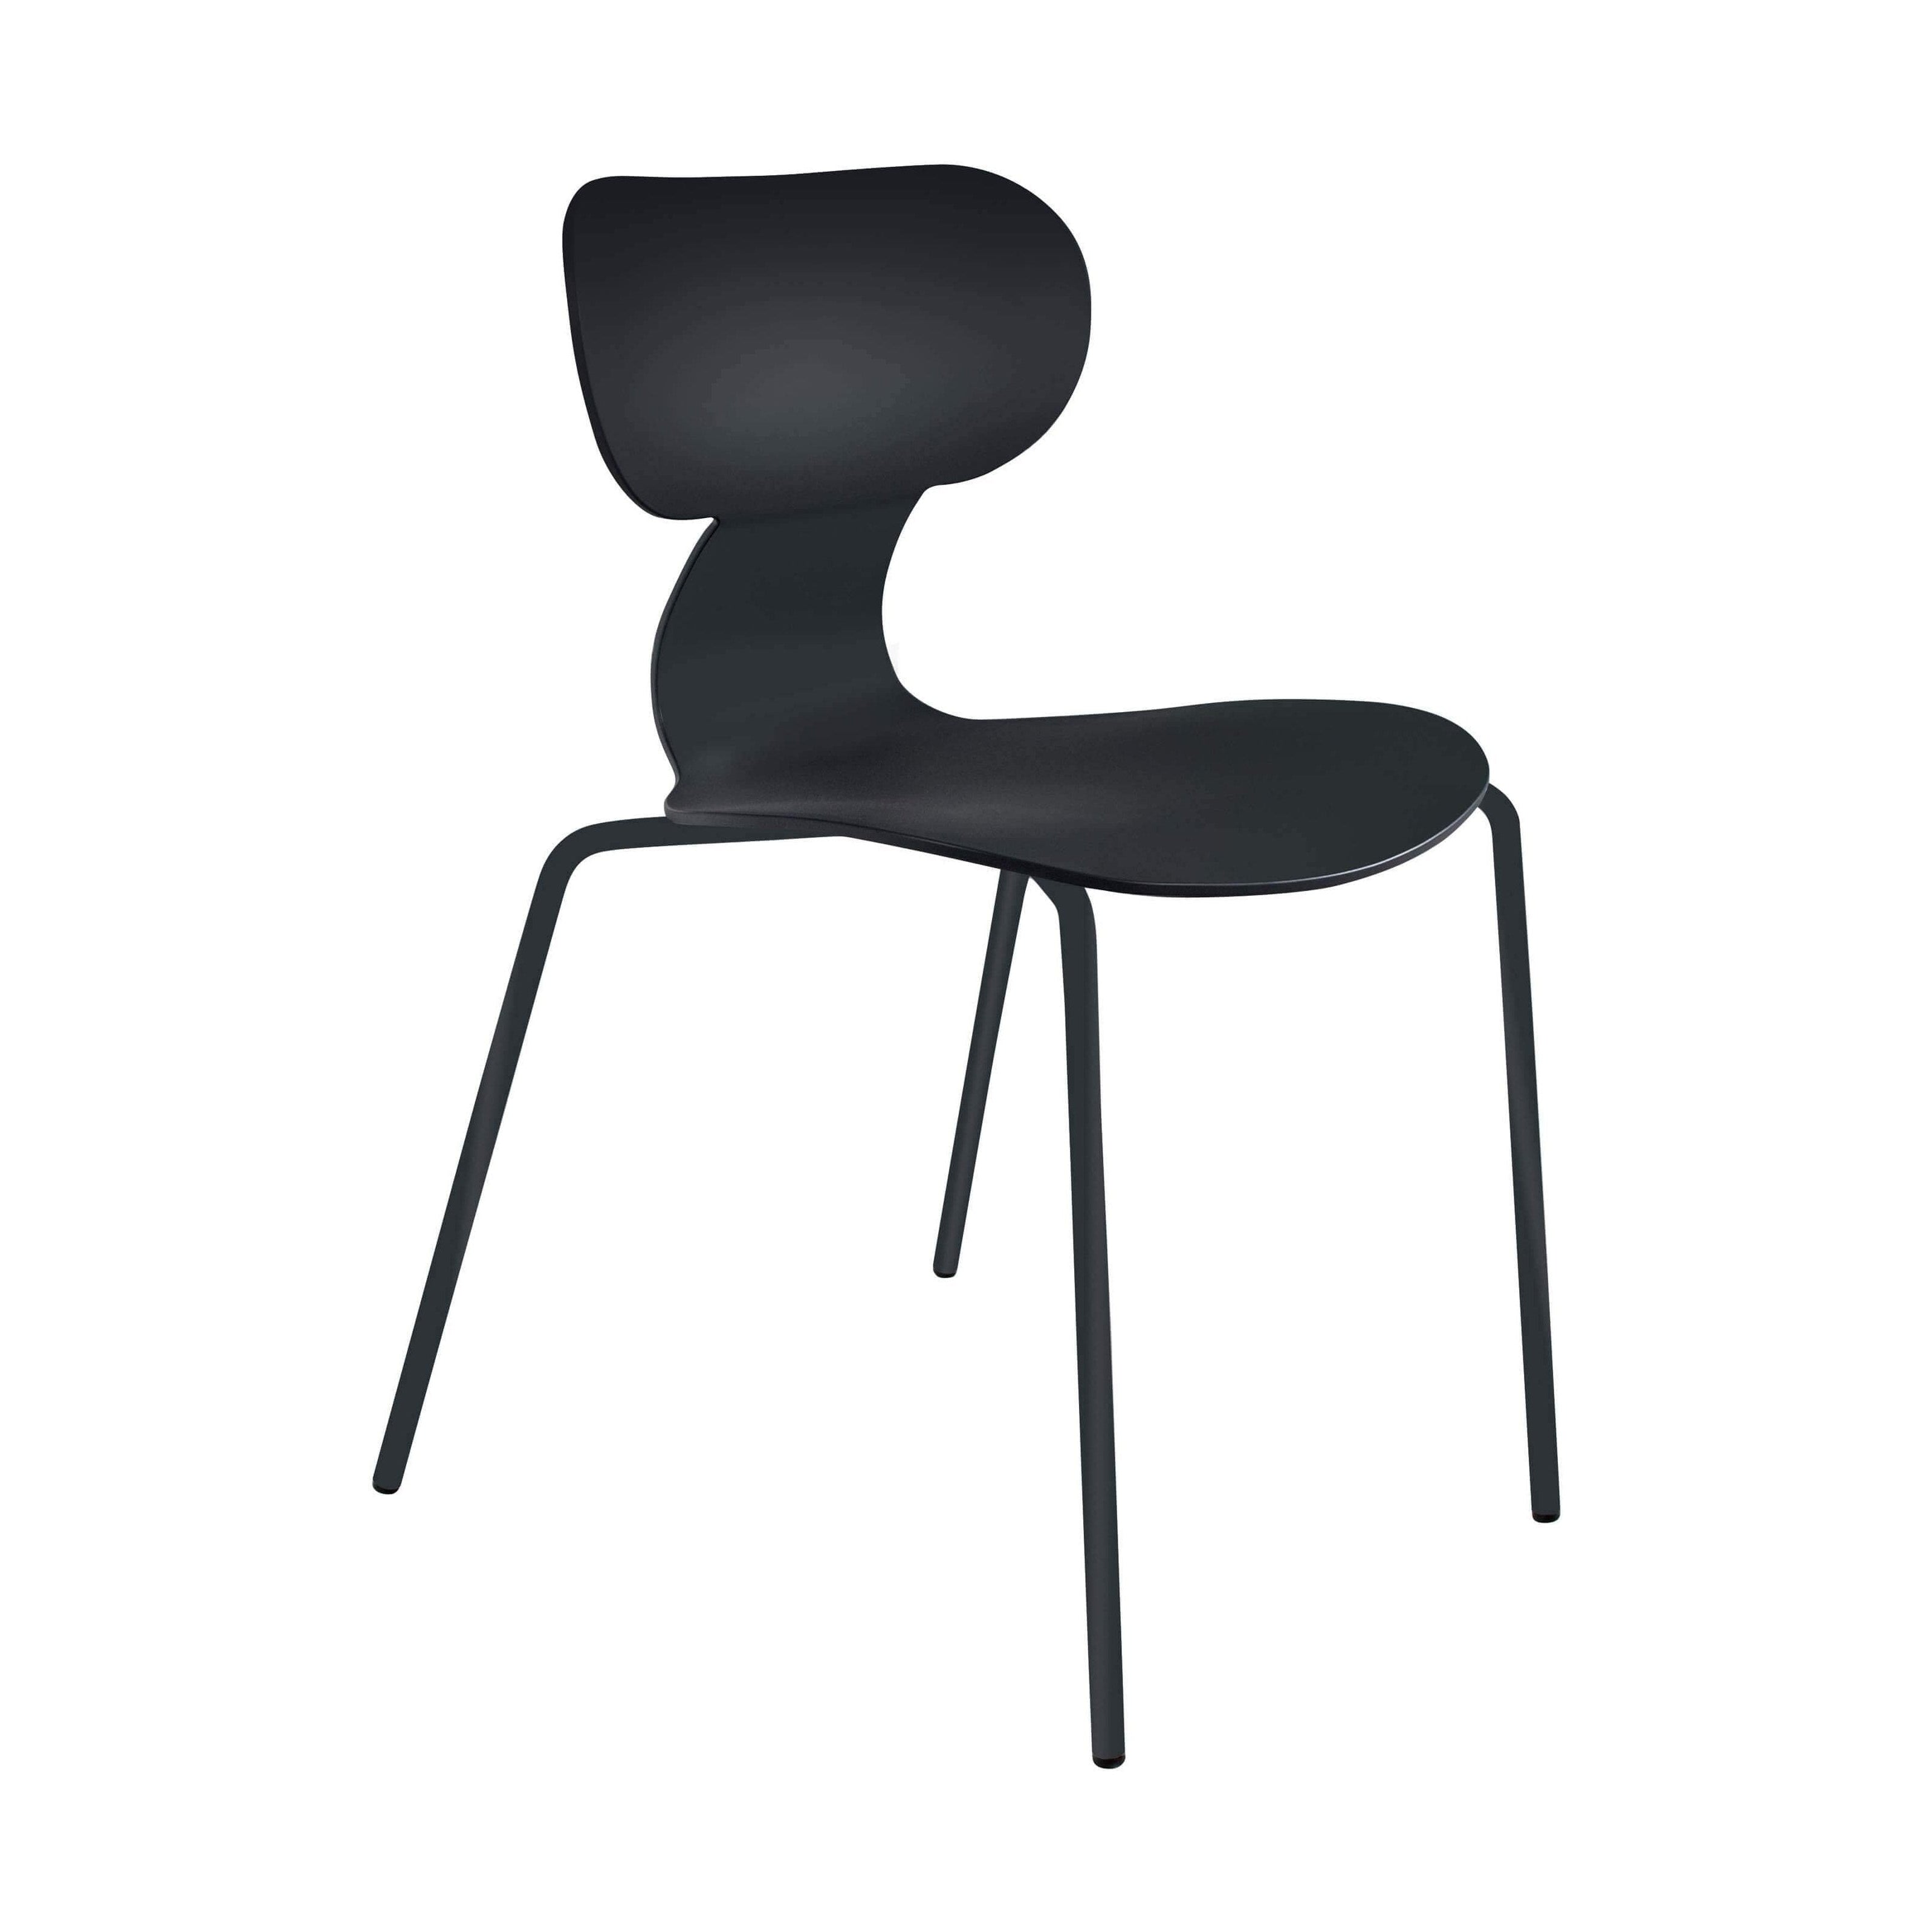 Muubs Yogo S Dining Chair, Black